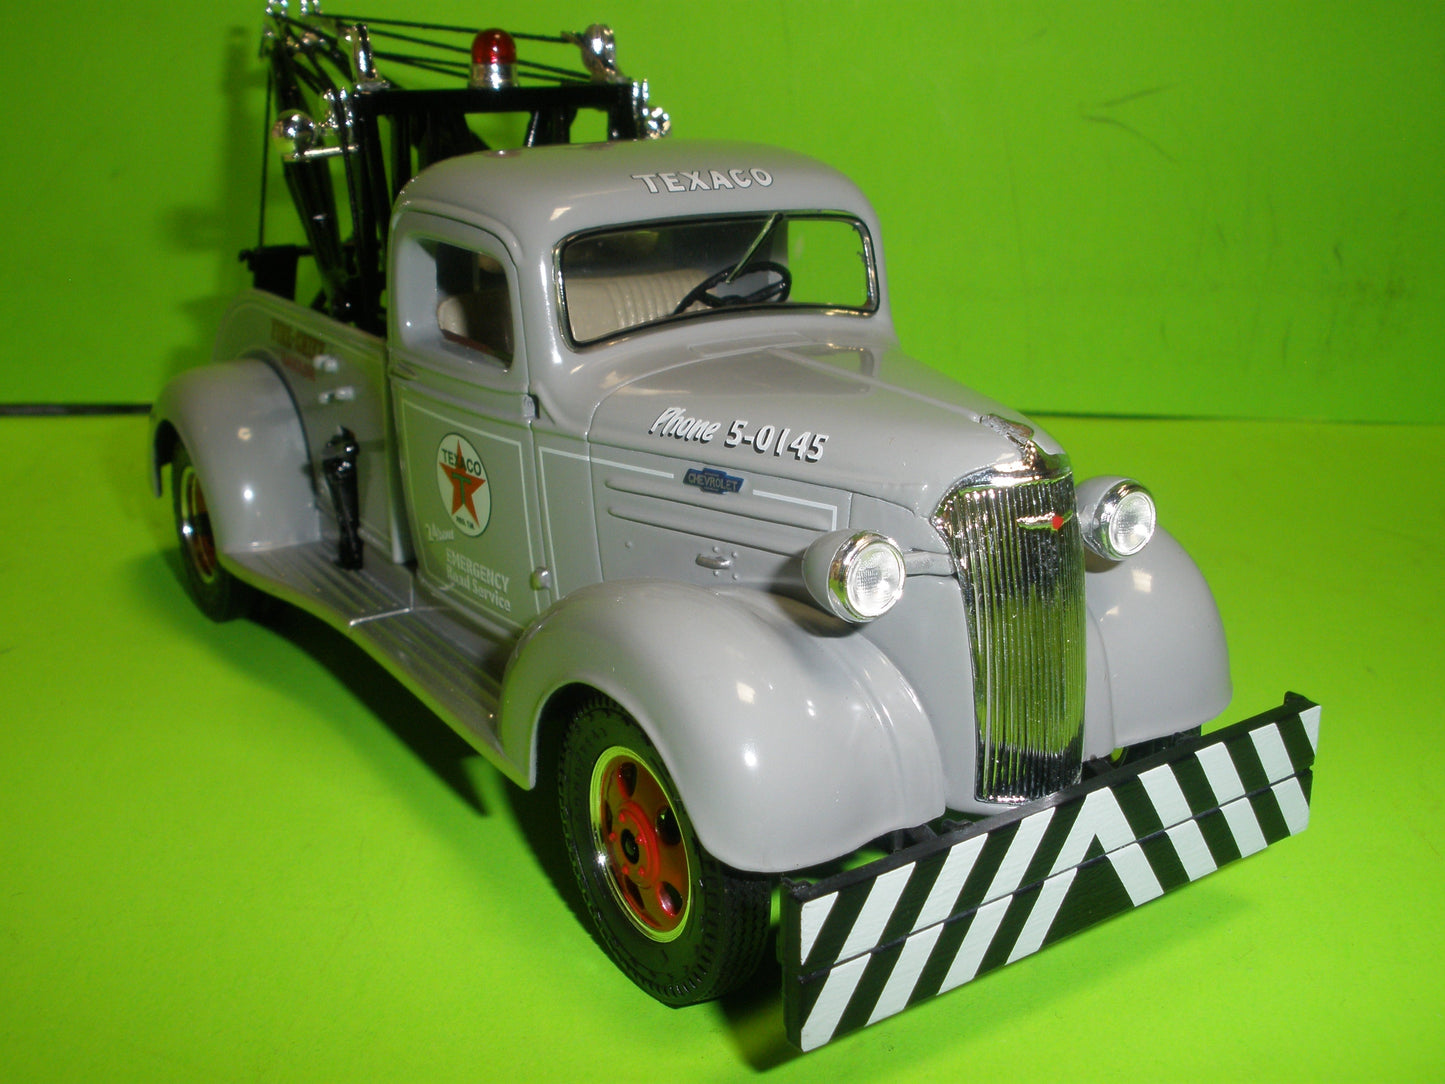 Texaco Emergency Road Services 1937 Chevrolet Tow Truck